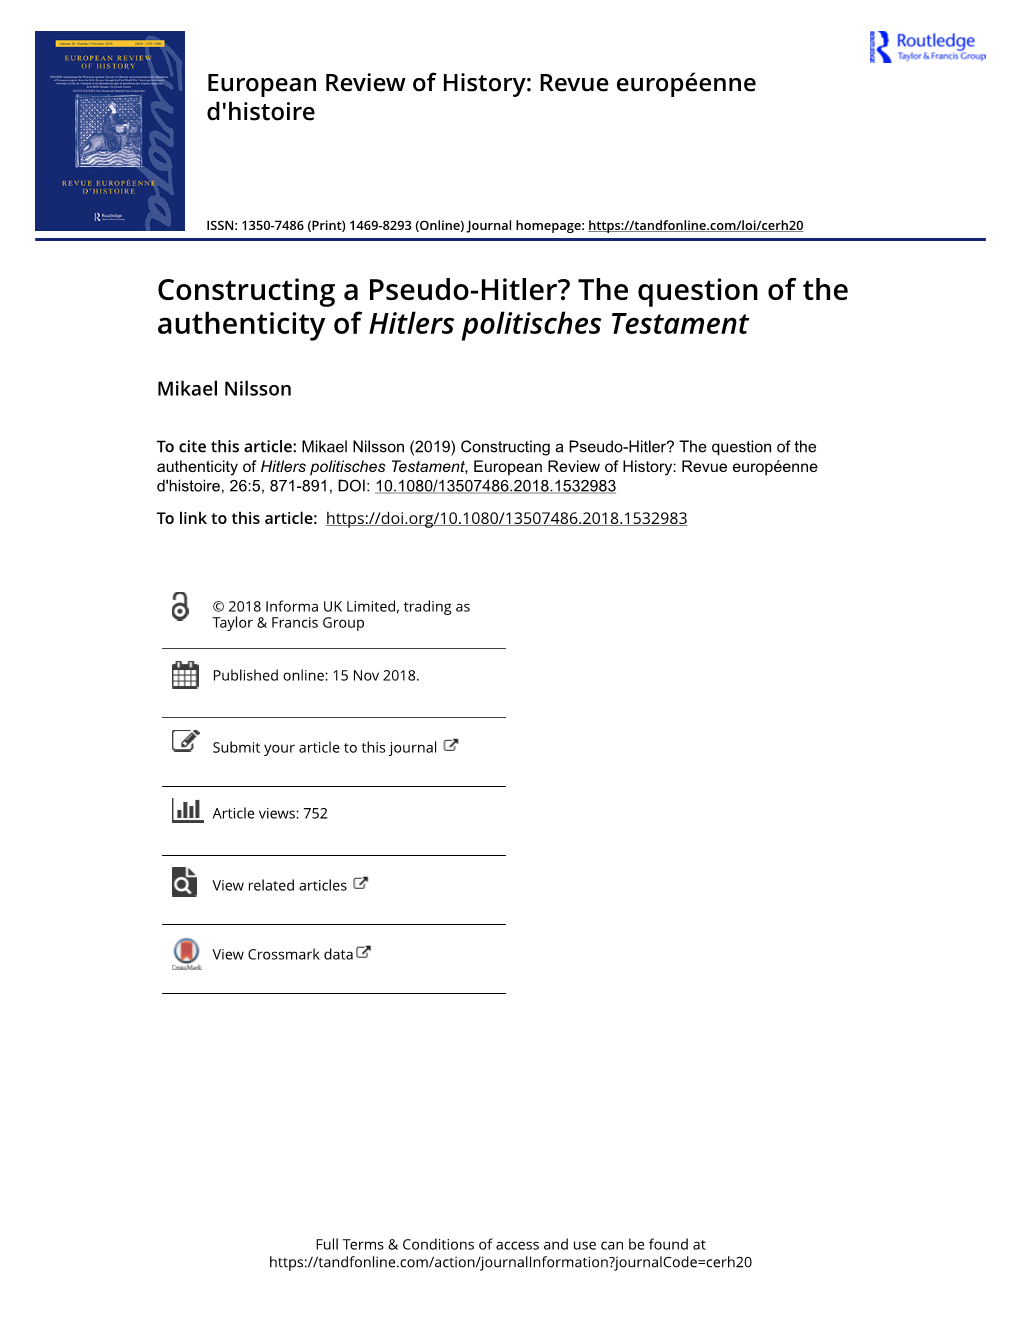 Constructing a Pseudo-Hitler? the Question of the Authenticity of Hitlers Politisches Testament